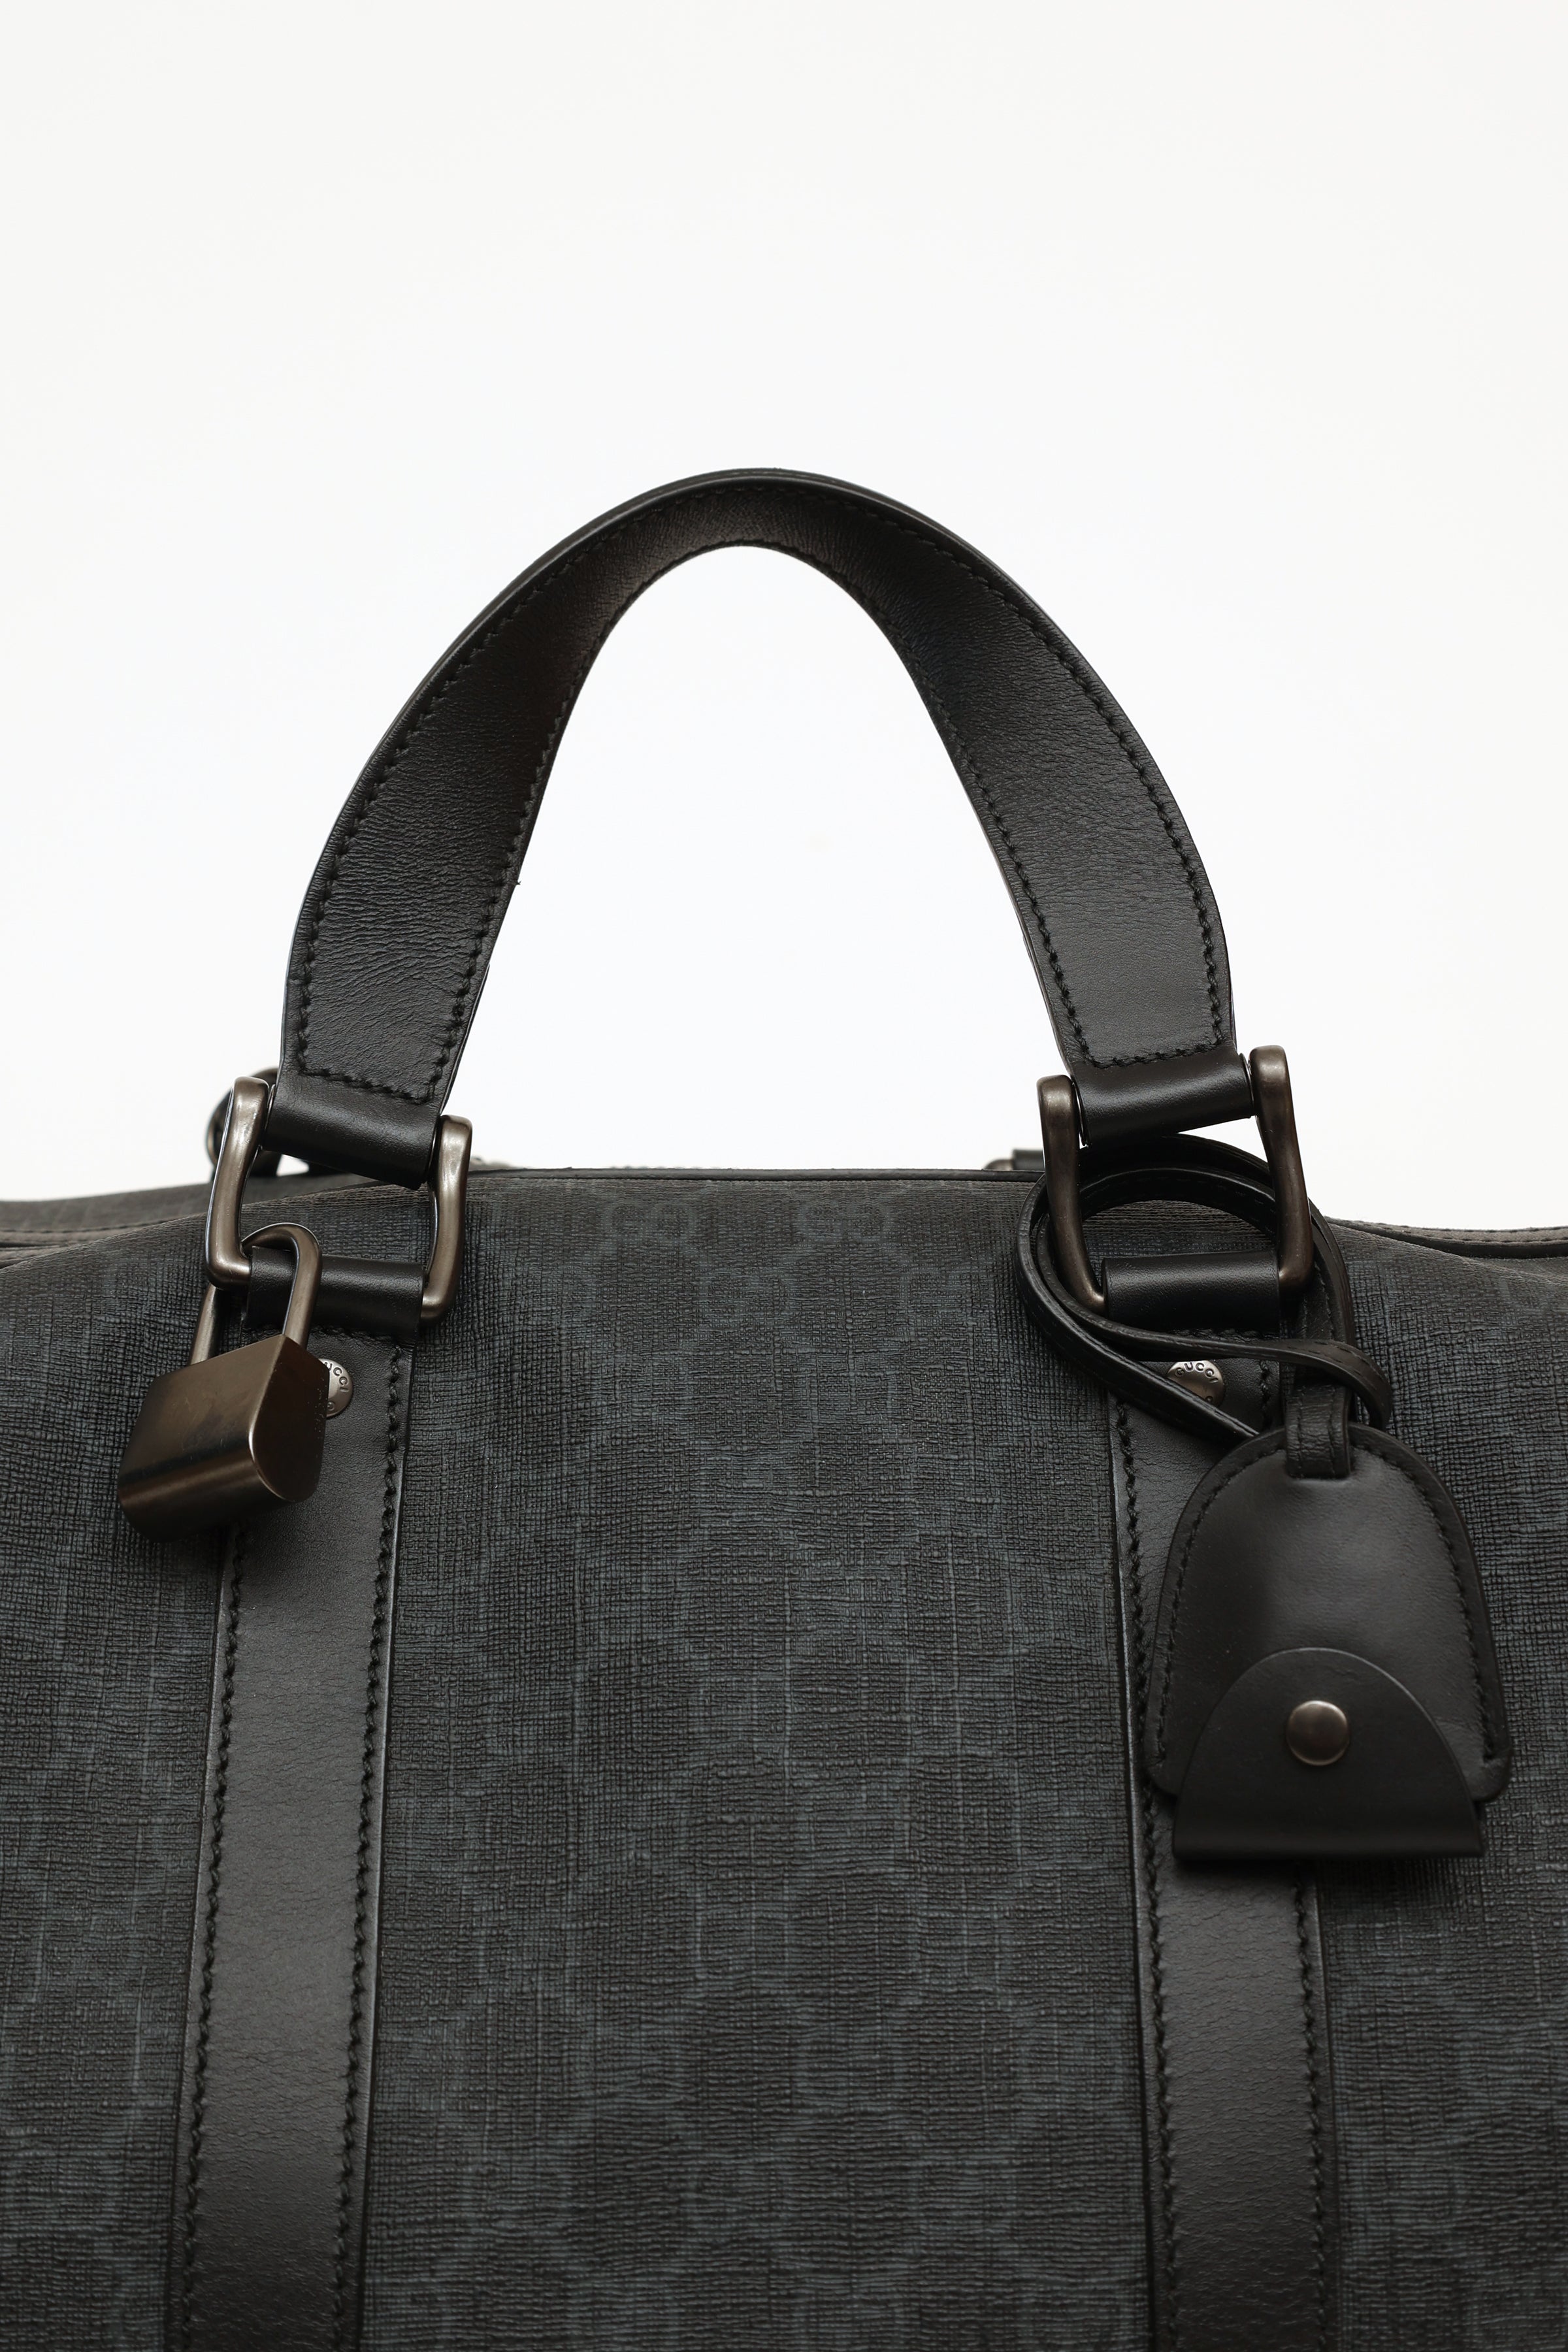 GG Black carry-on duffle